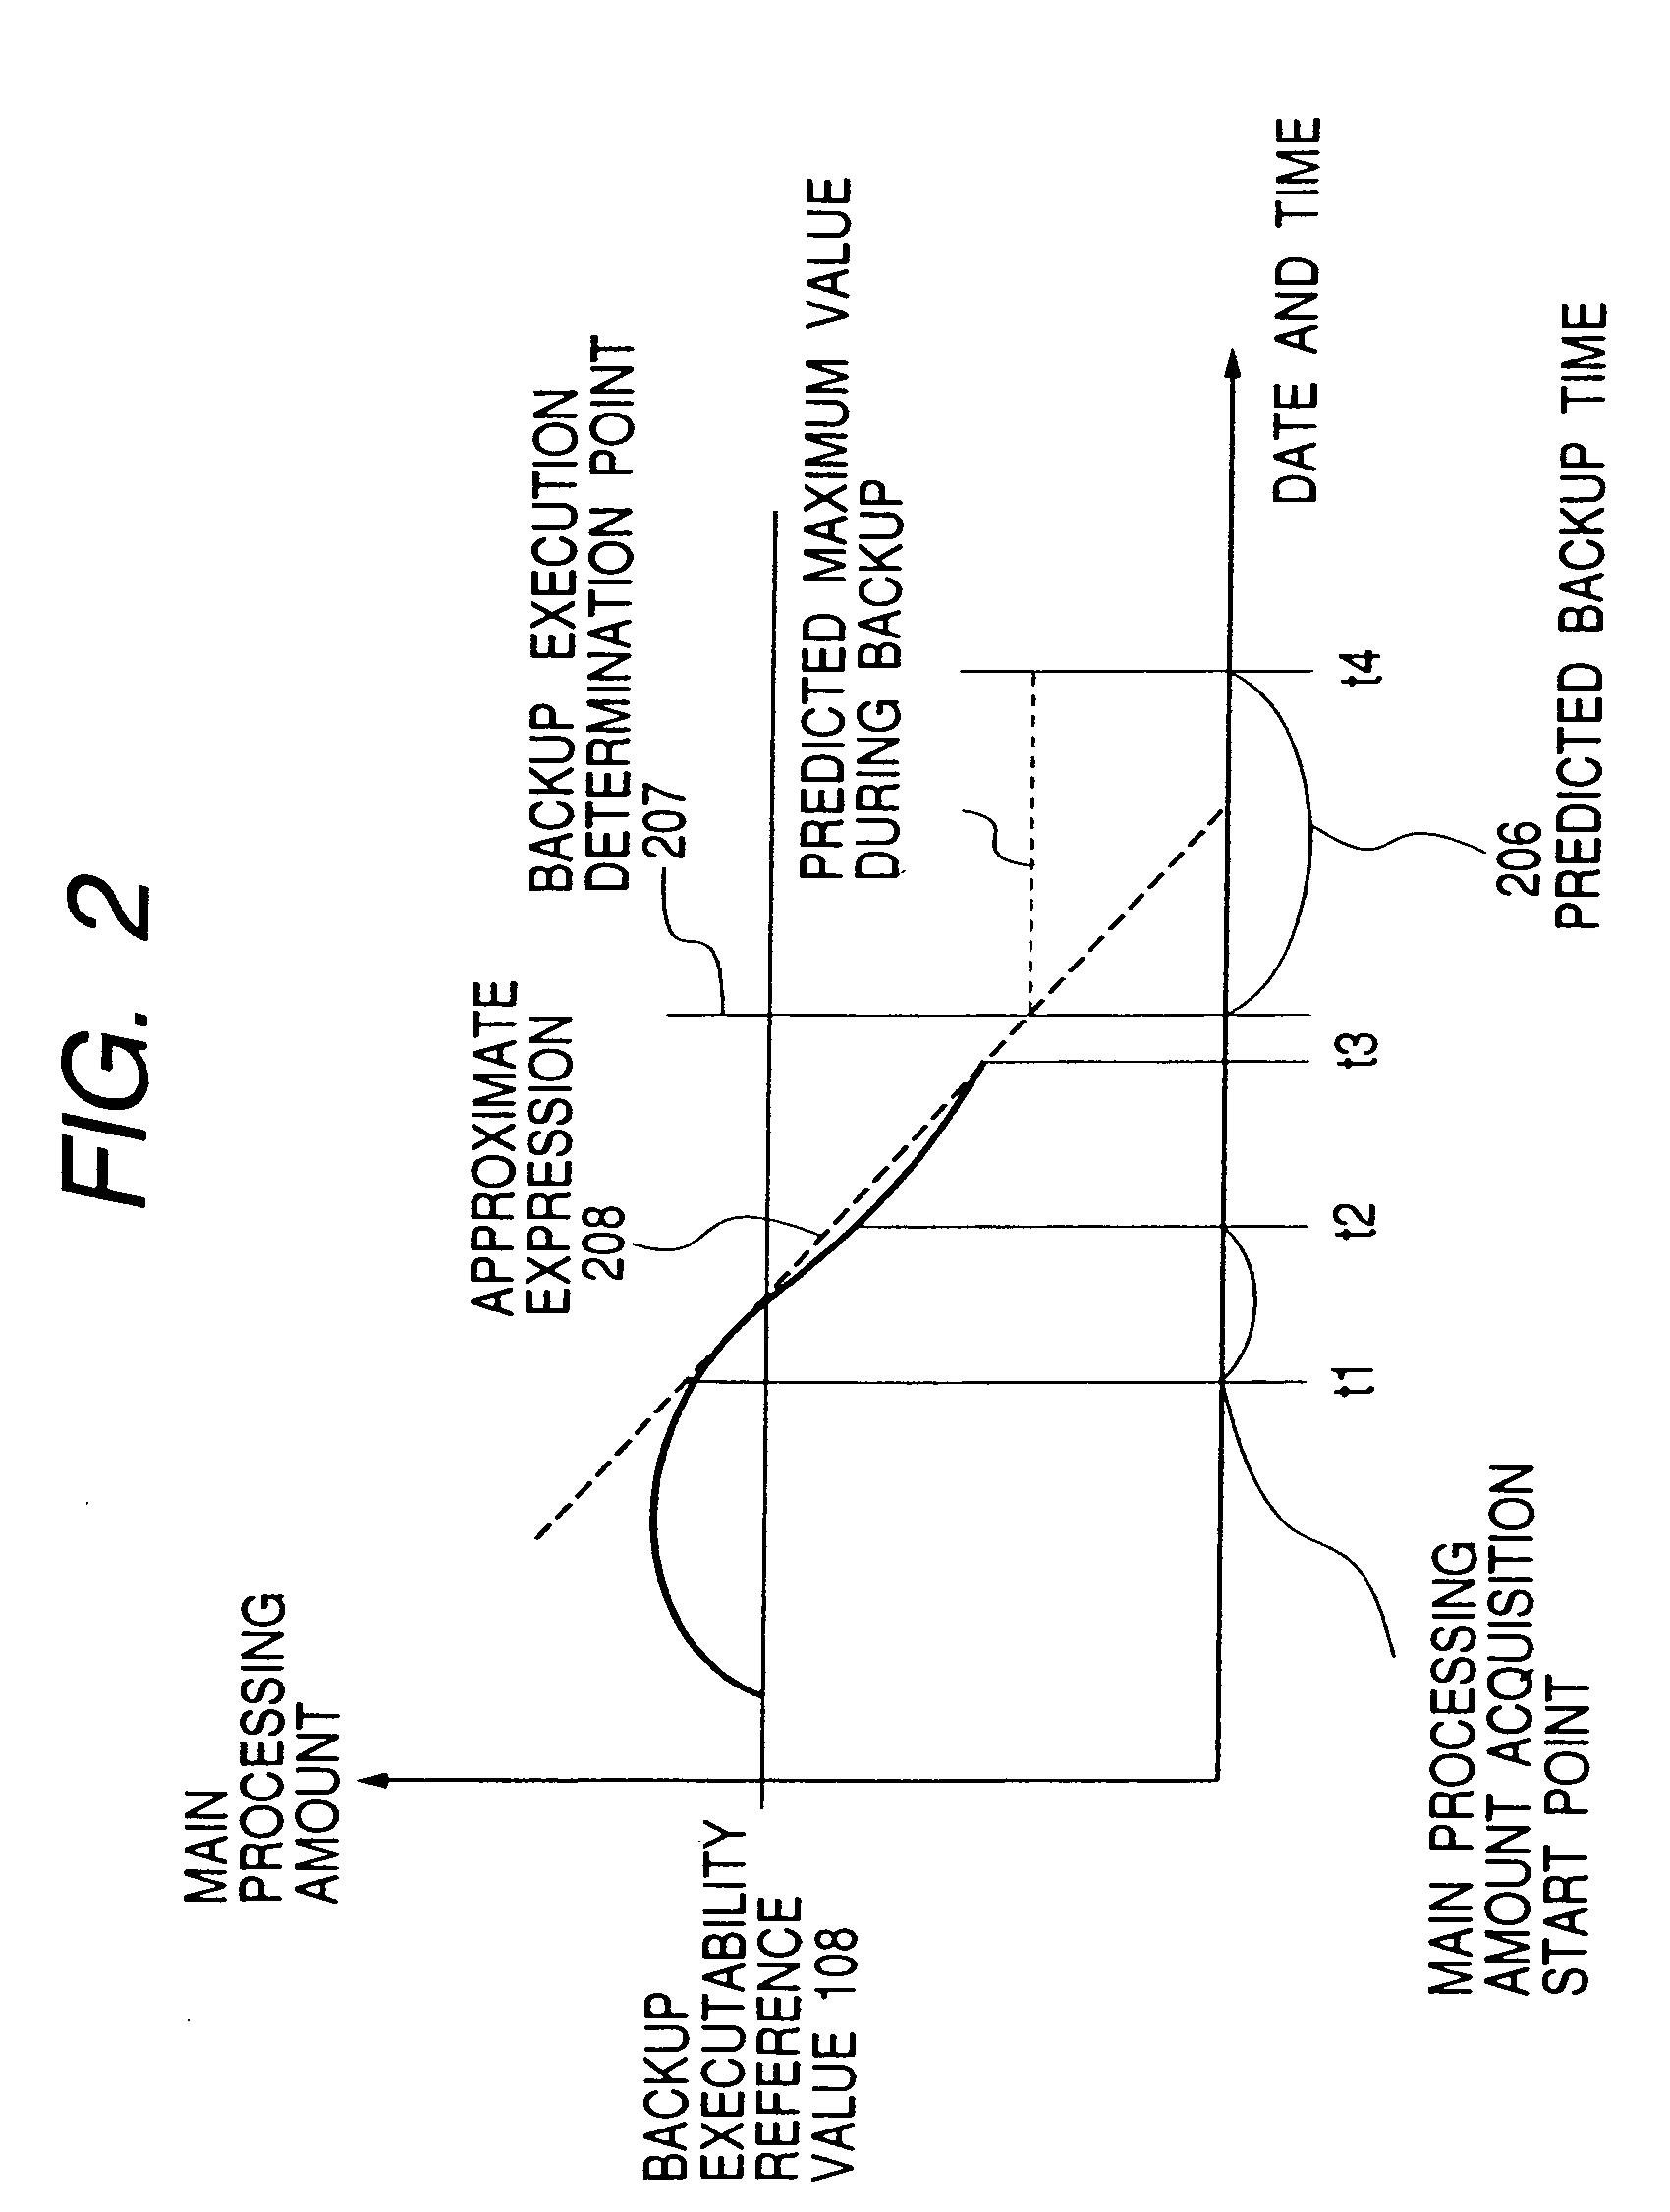 Method for determining execution of backup on a database